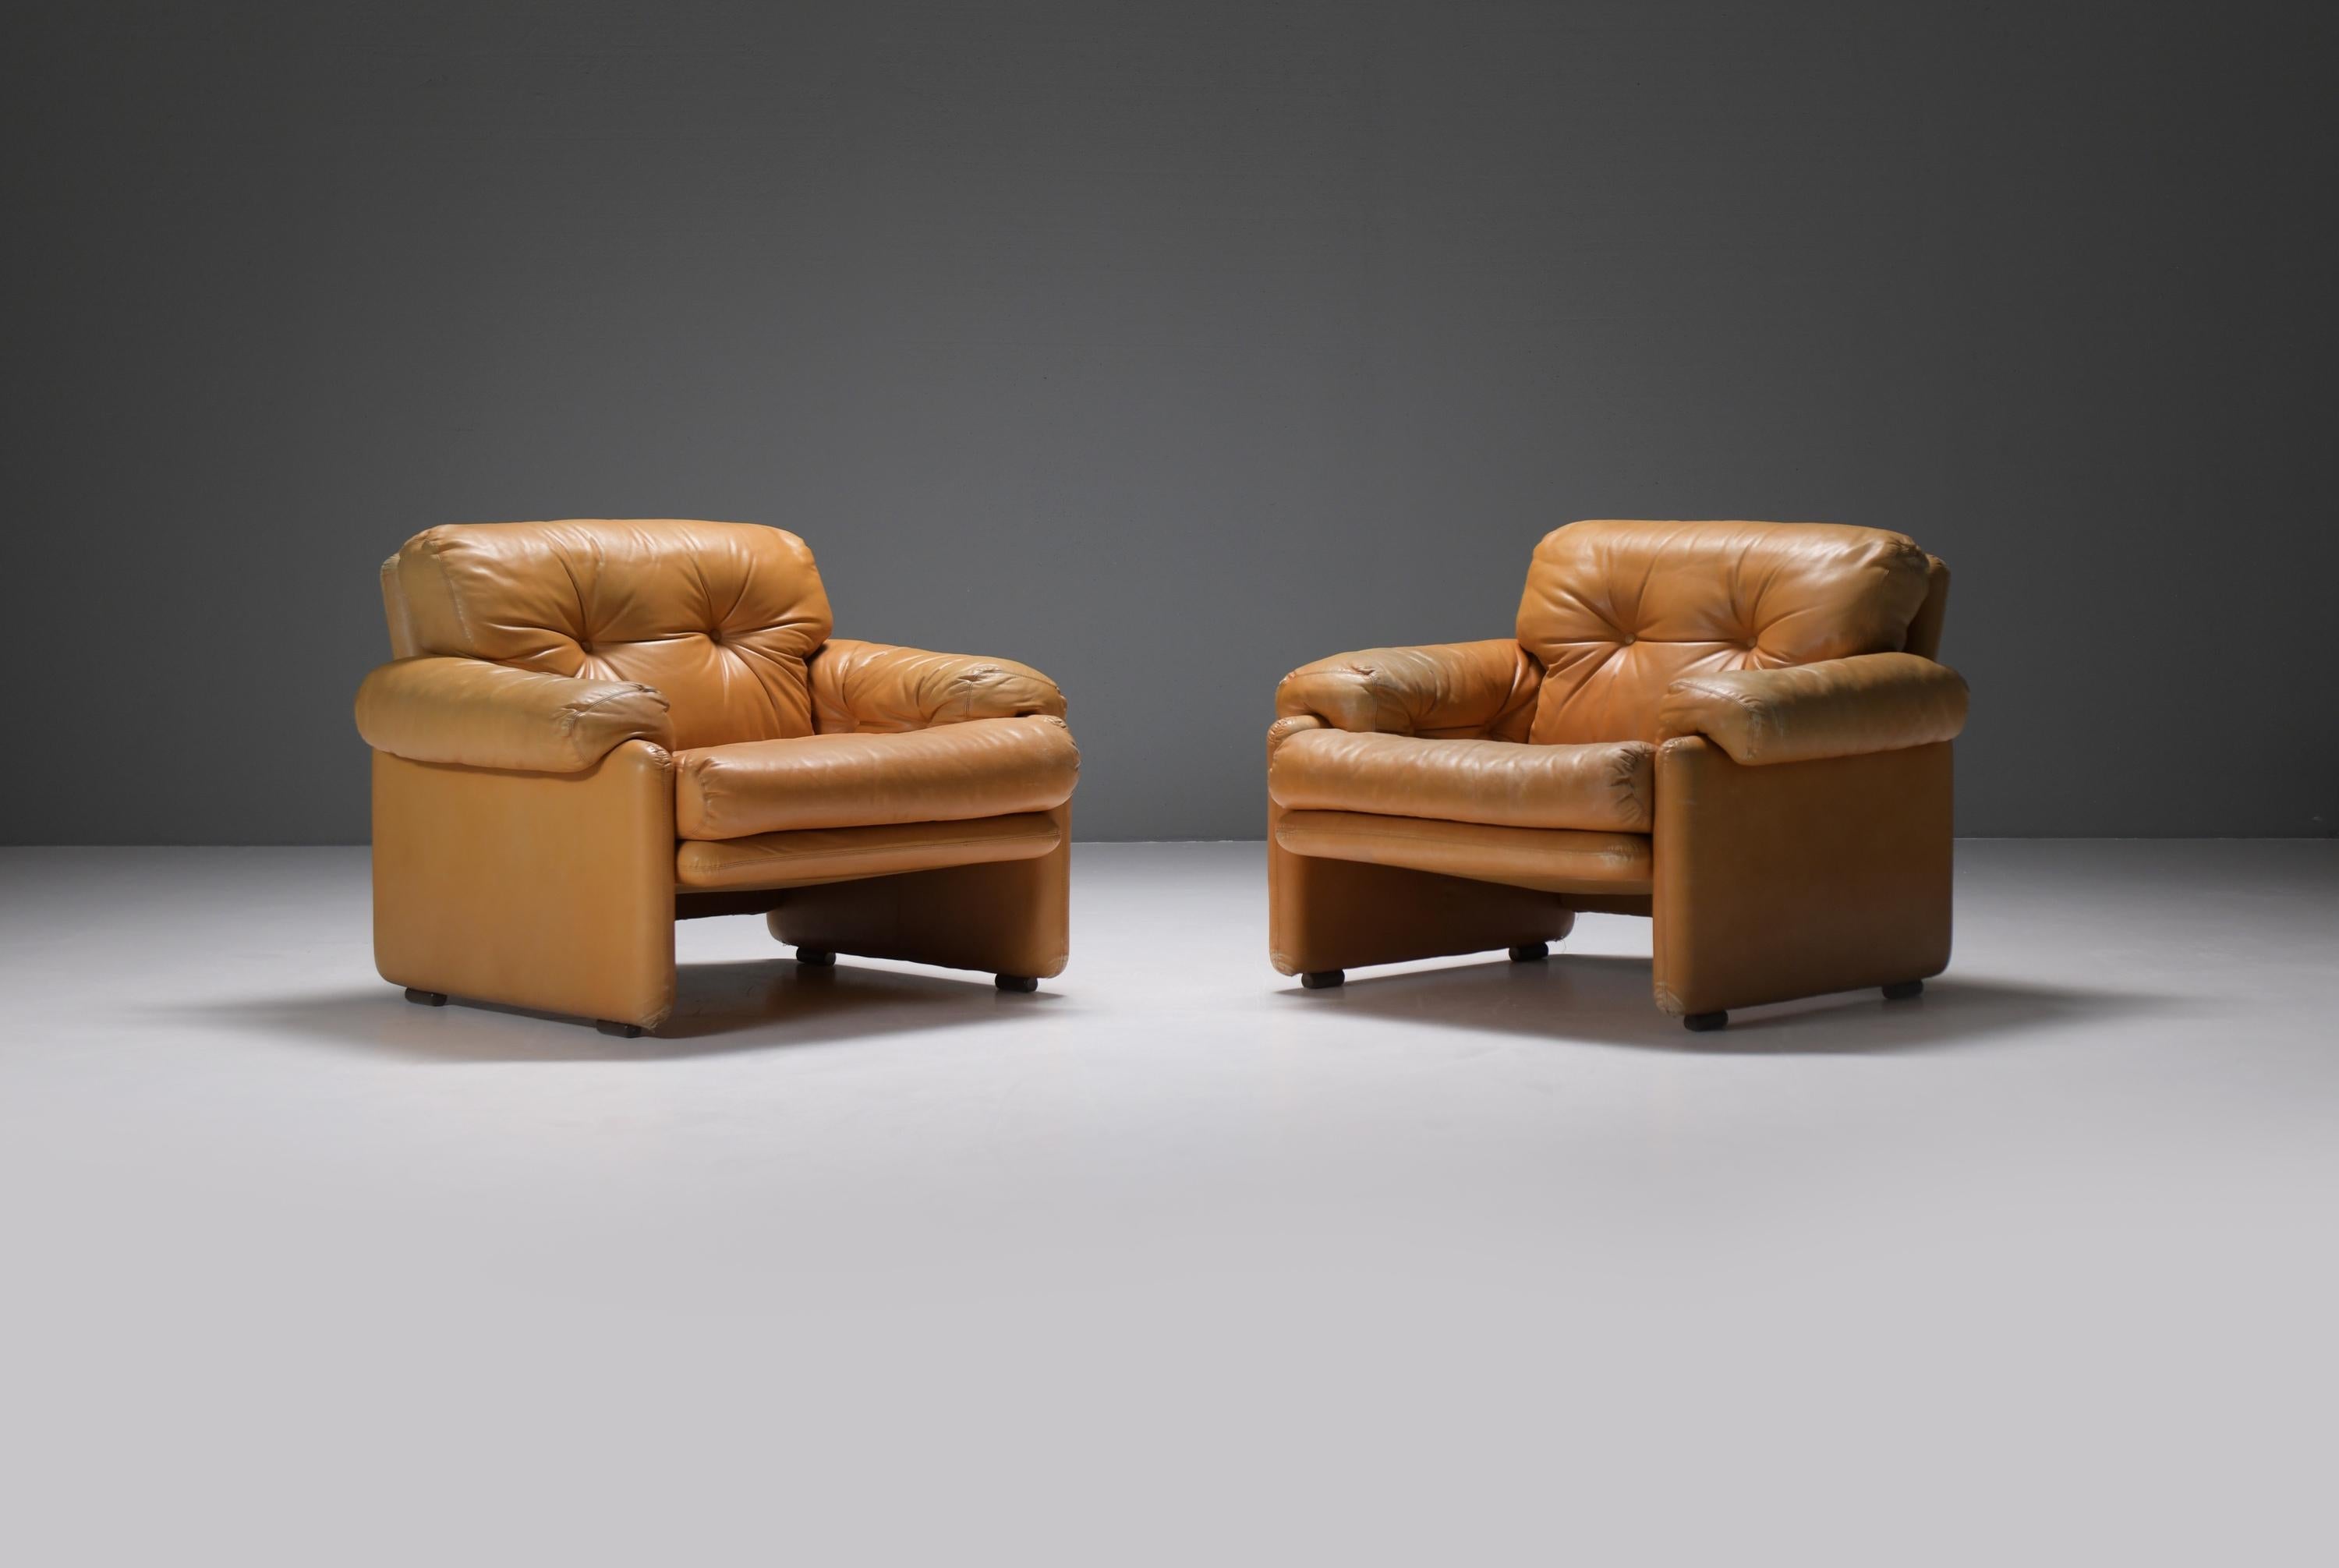  Stunning Coronado chairs in cognac leather by Afra & Tobia Scarpa - B&B Italia For Sale 3